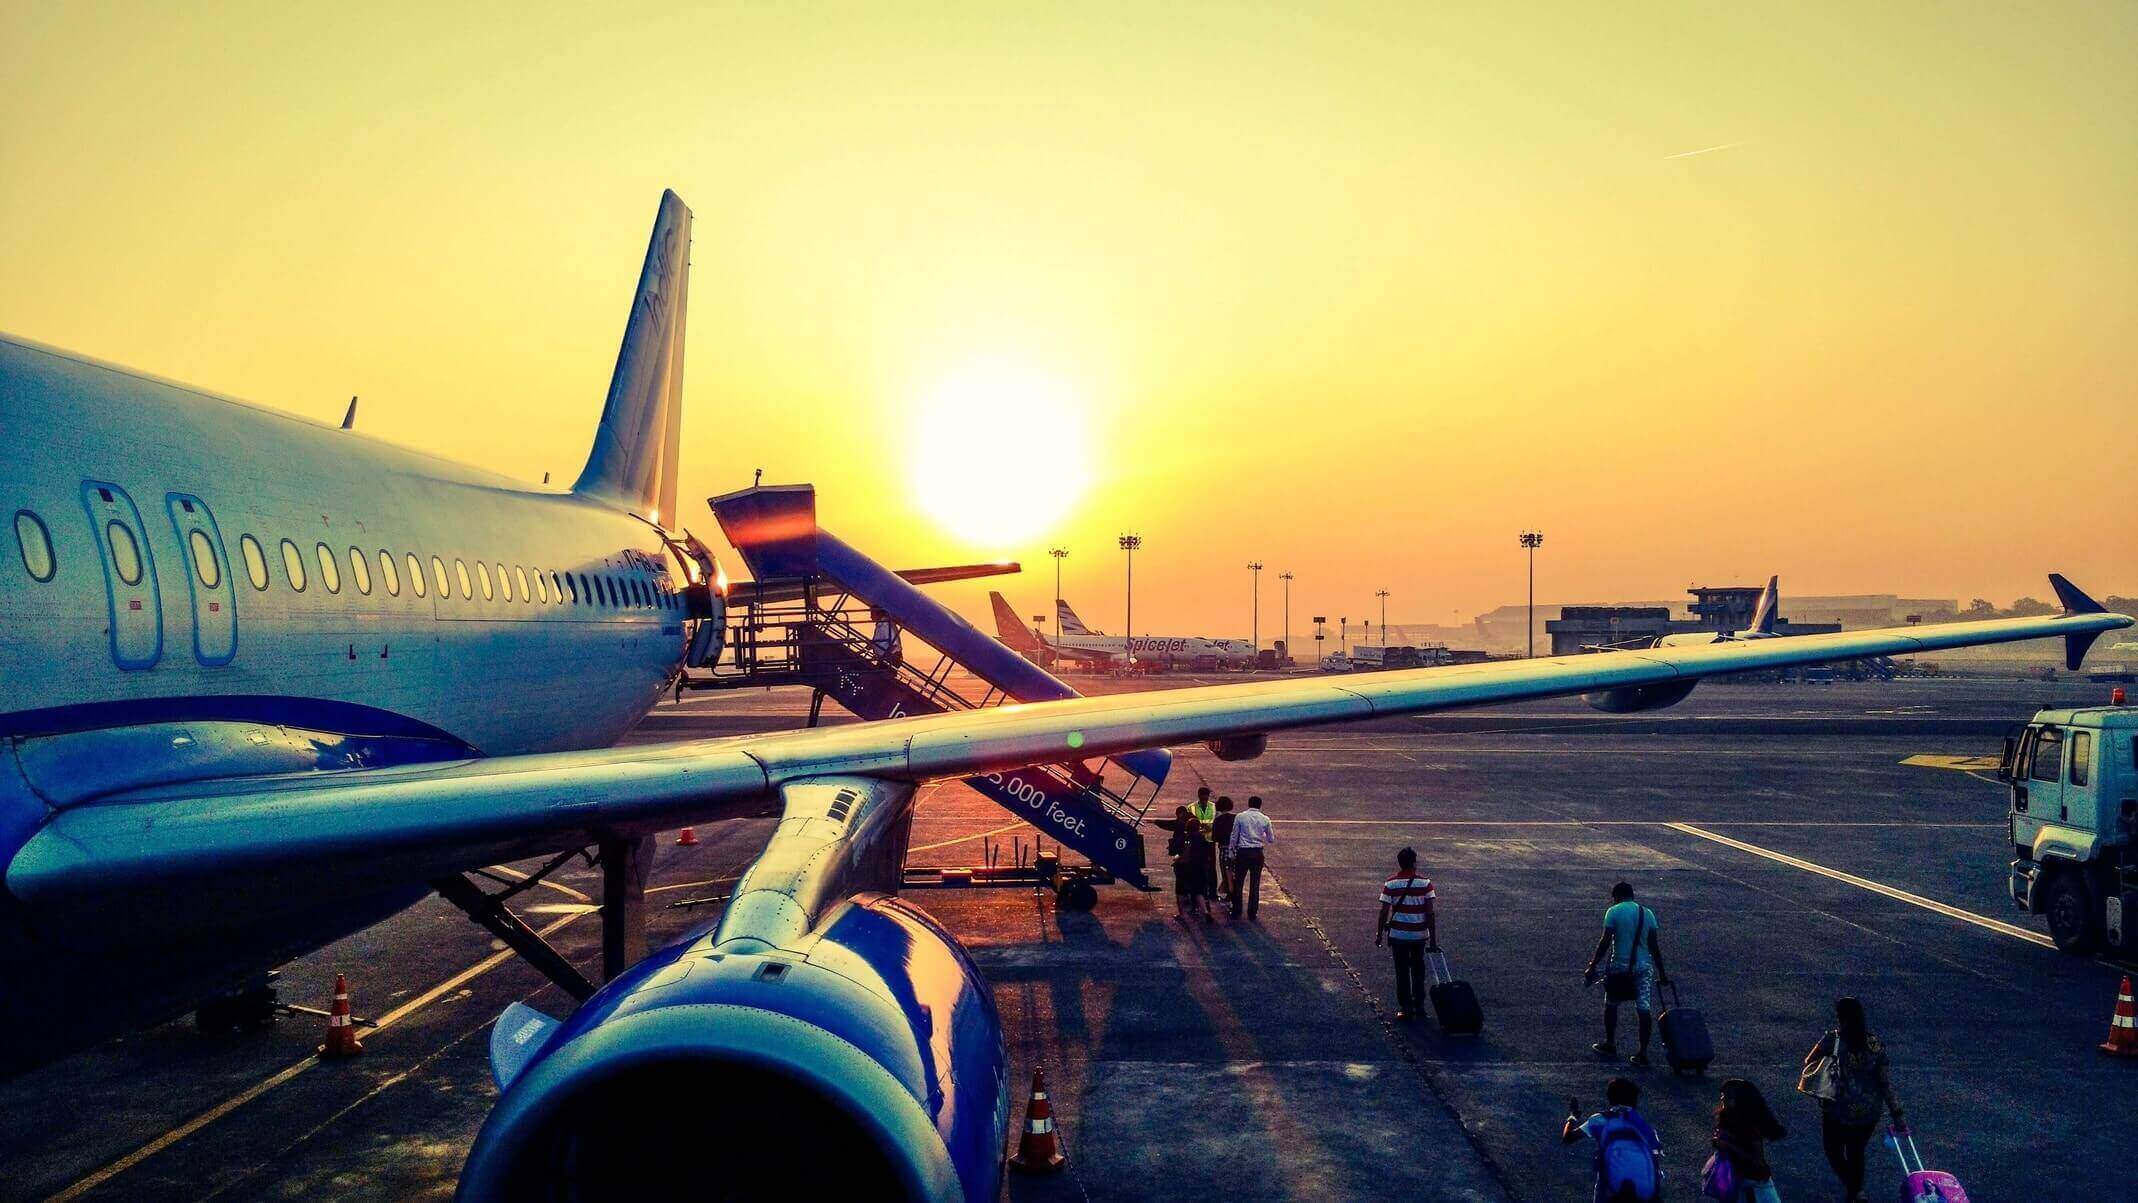 10 tips for finding last minute low fare flights and accommodations.